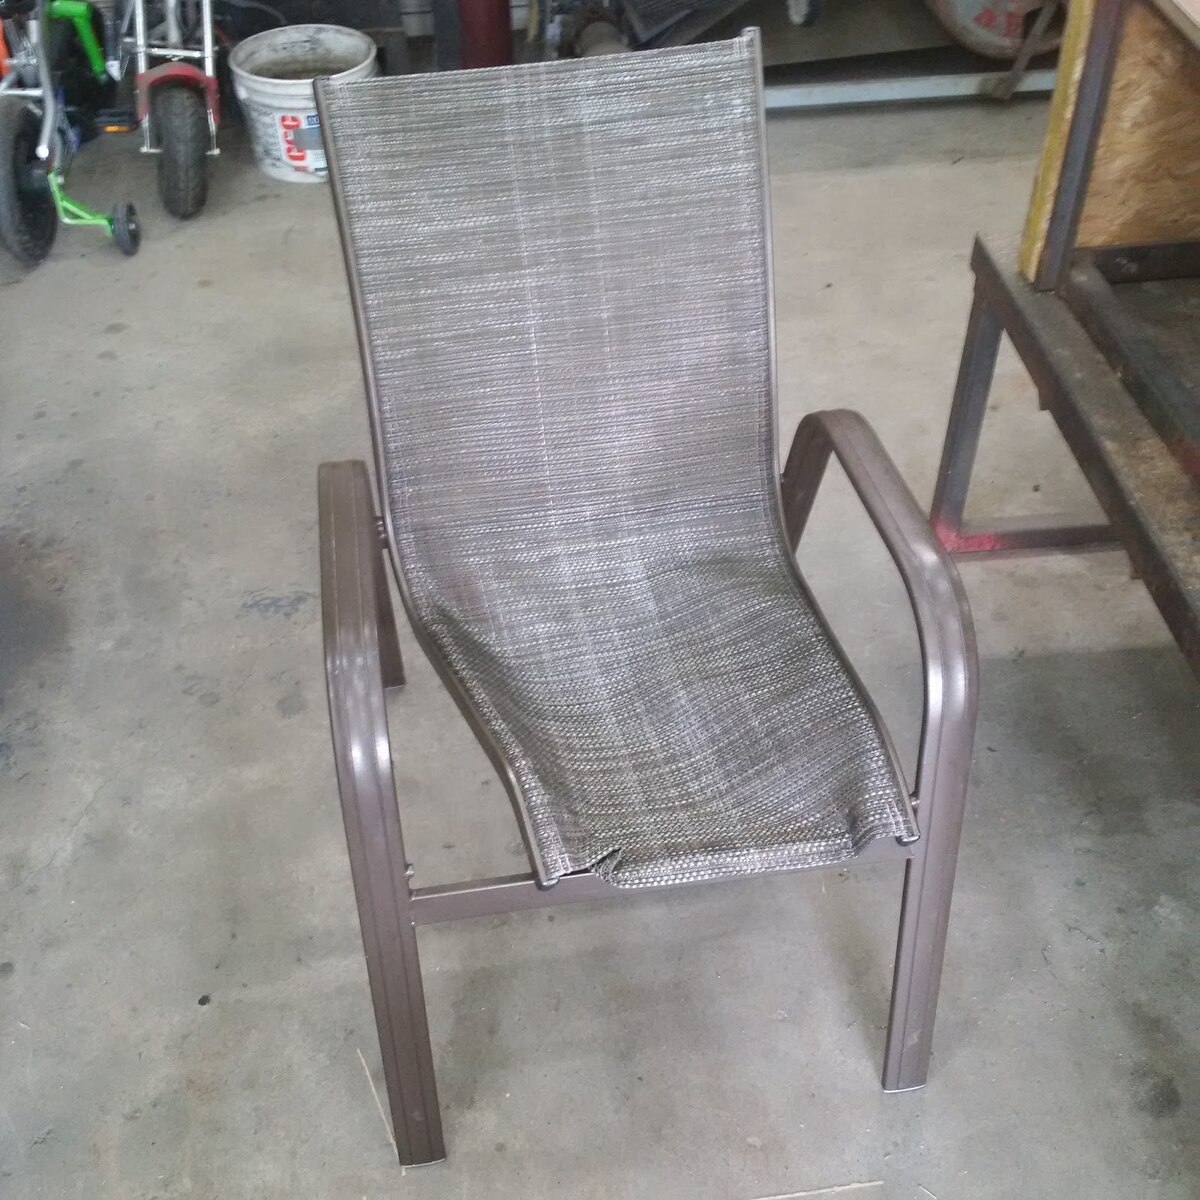 How To Fix Patio Chairs